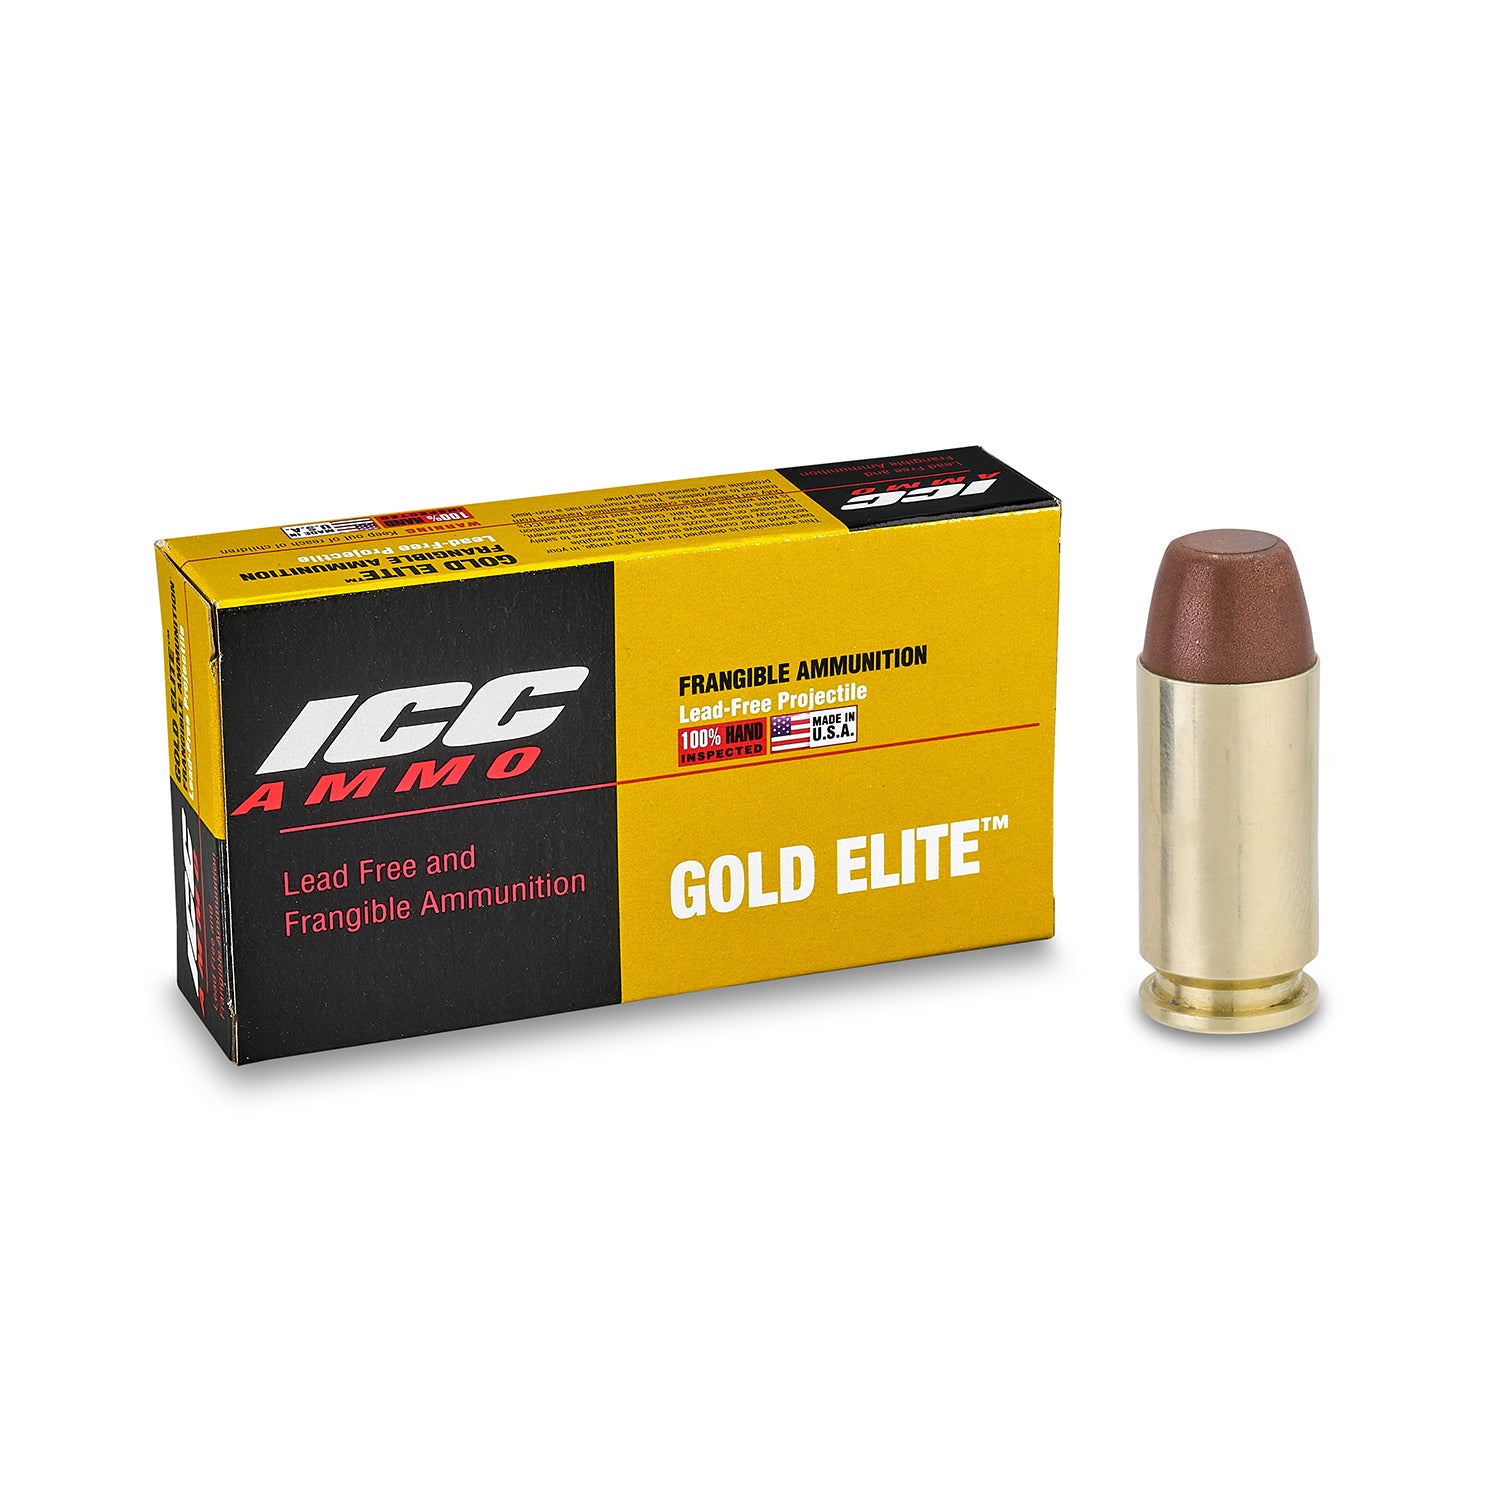 40 S&W 125 Grain Flat Point Frangible Training (box of 50)